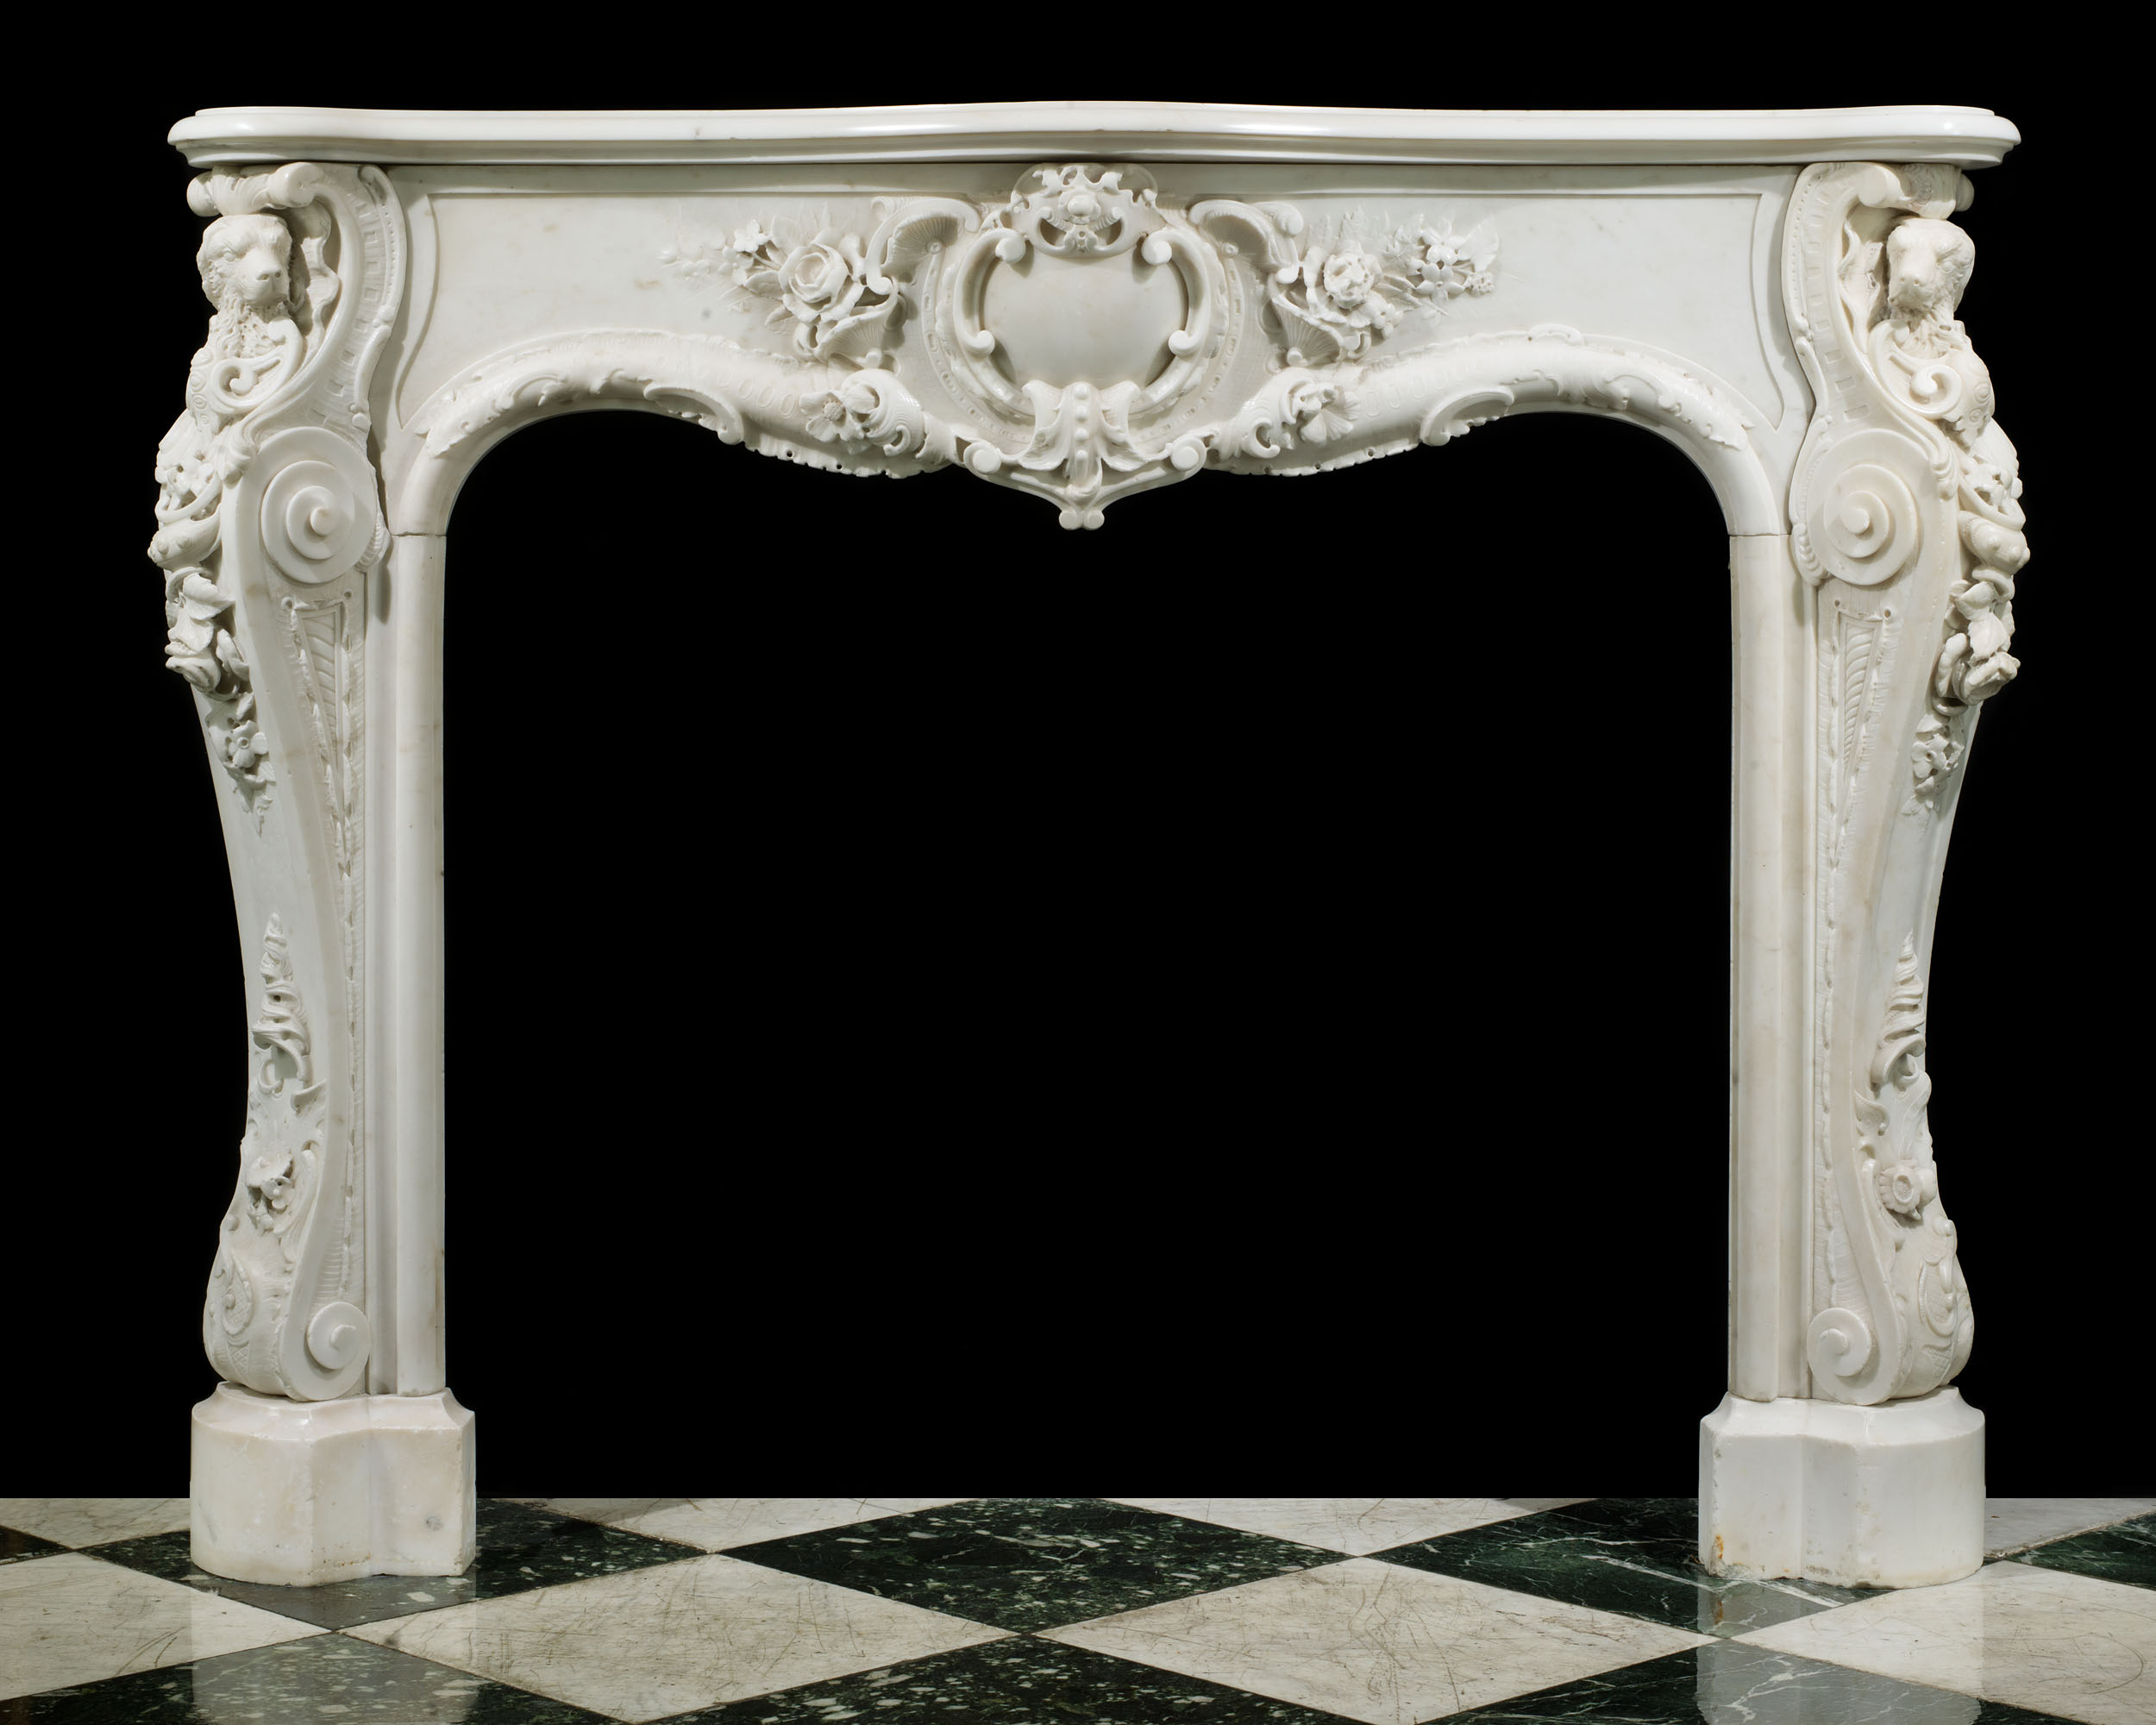 Statuary Marble English Rococo Fireplace



